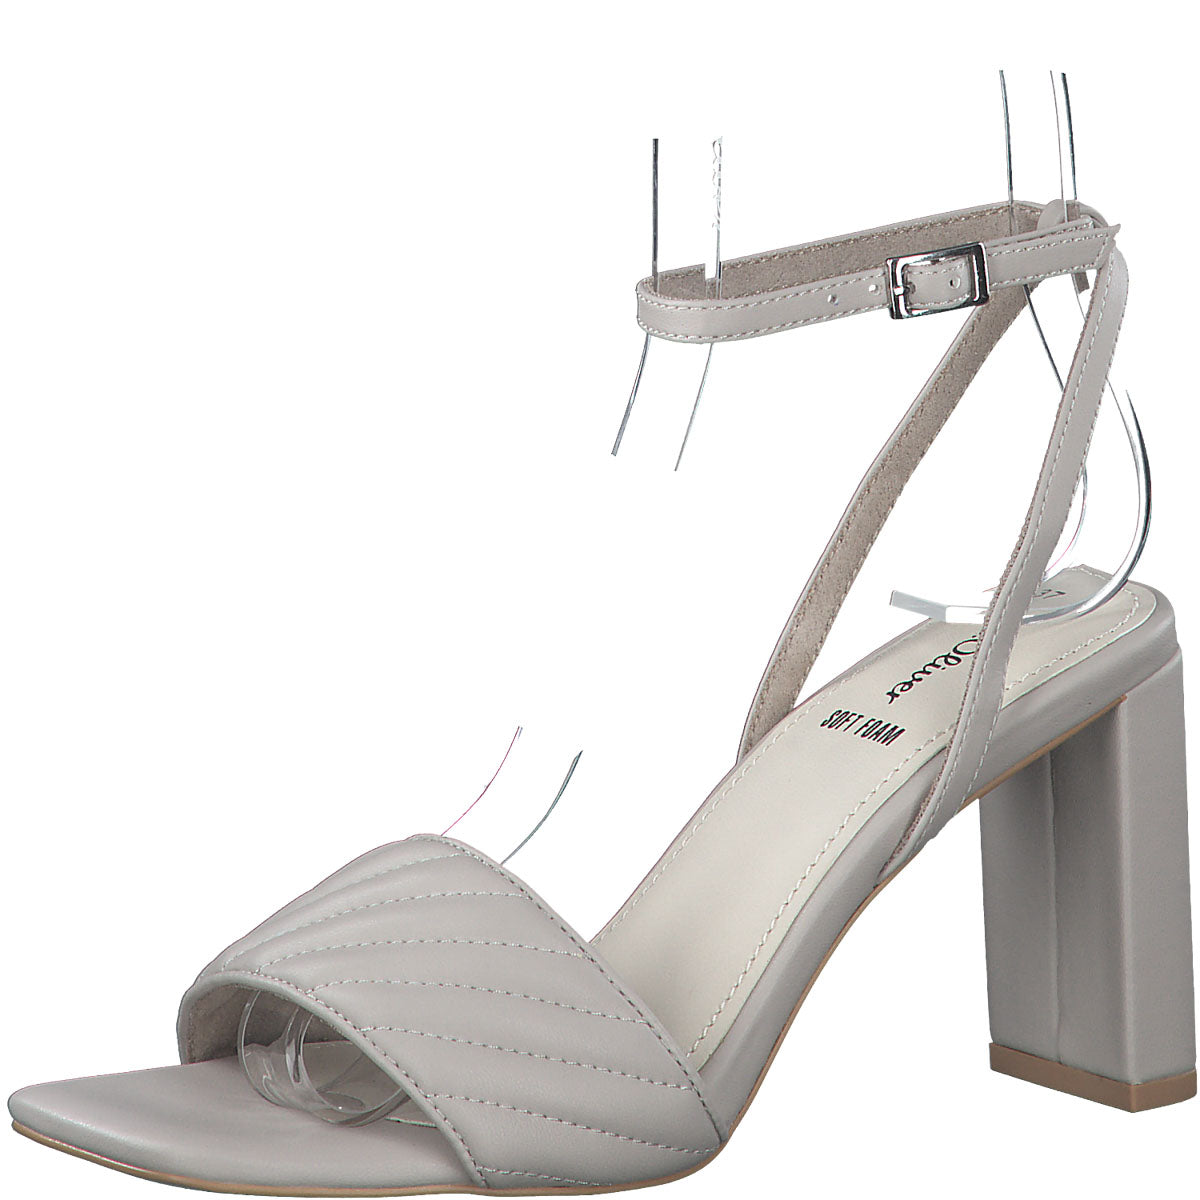 Sleek and Chic Trendy Square Toe Taupe Sandals